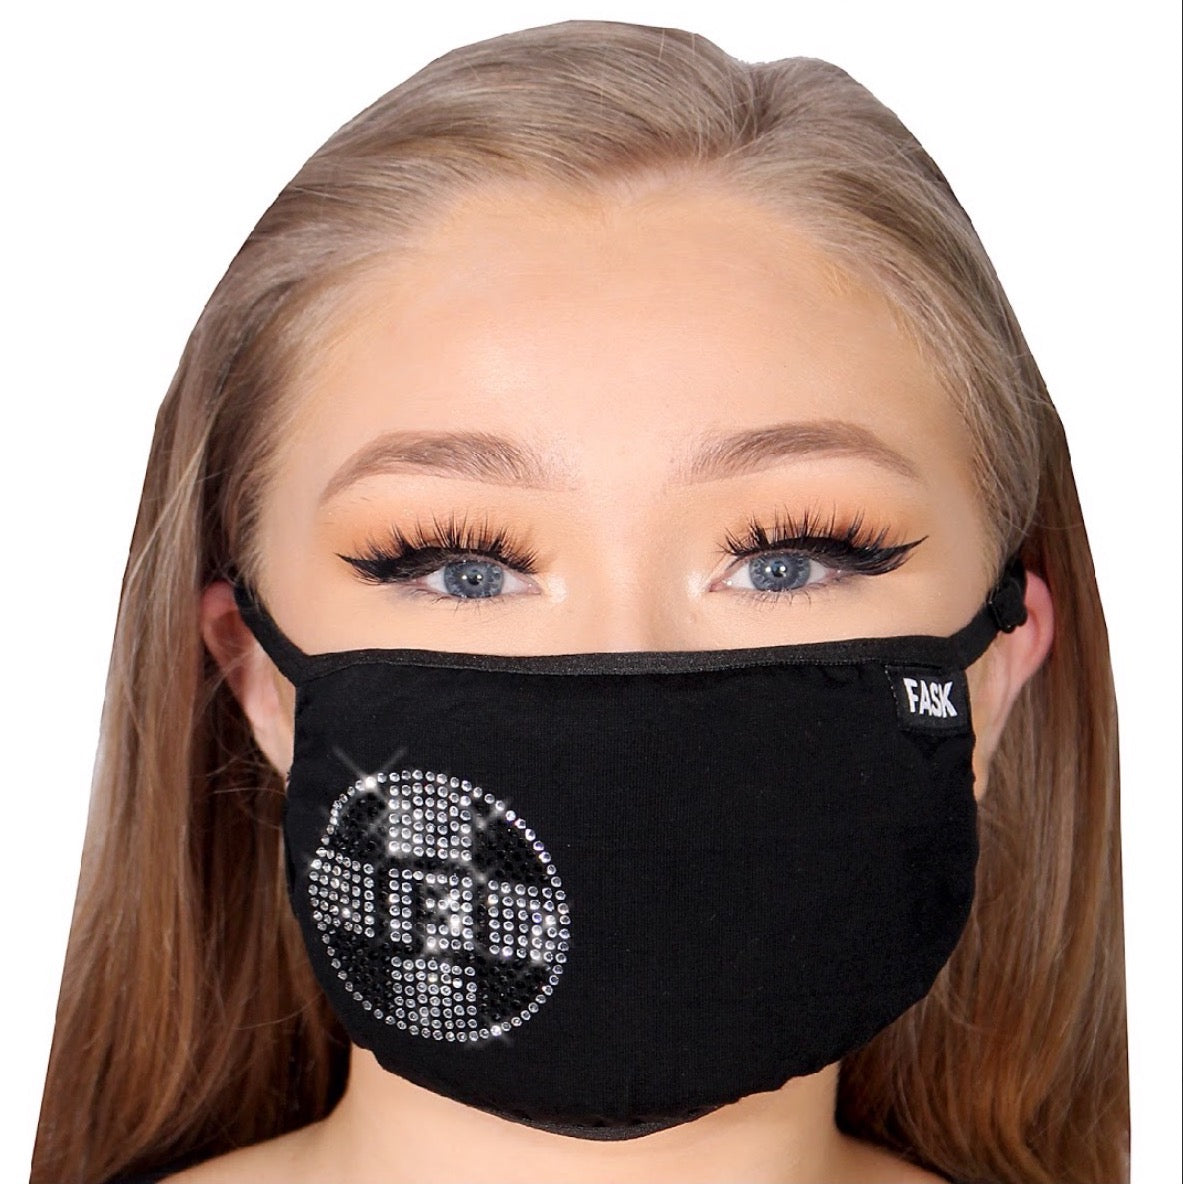 FASK Logo Cotton 2.0 Stoned Mask with Interchangeable Filter and Adjustable Size Strap